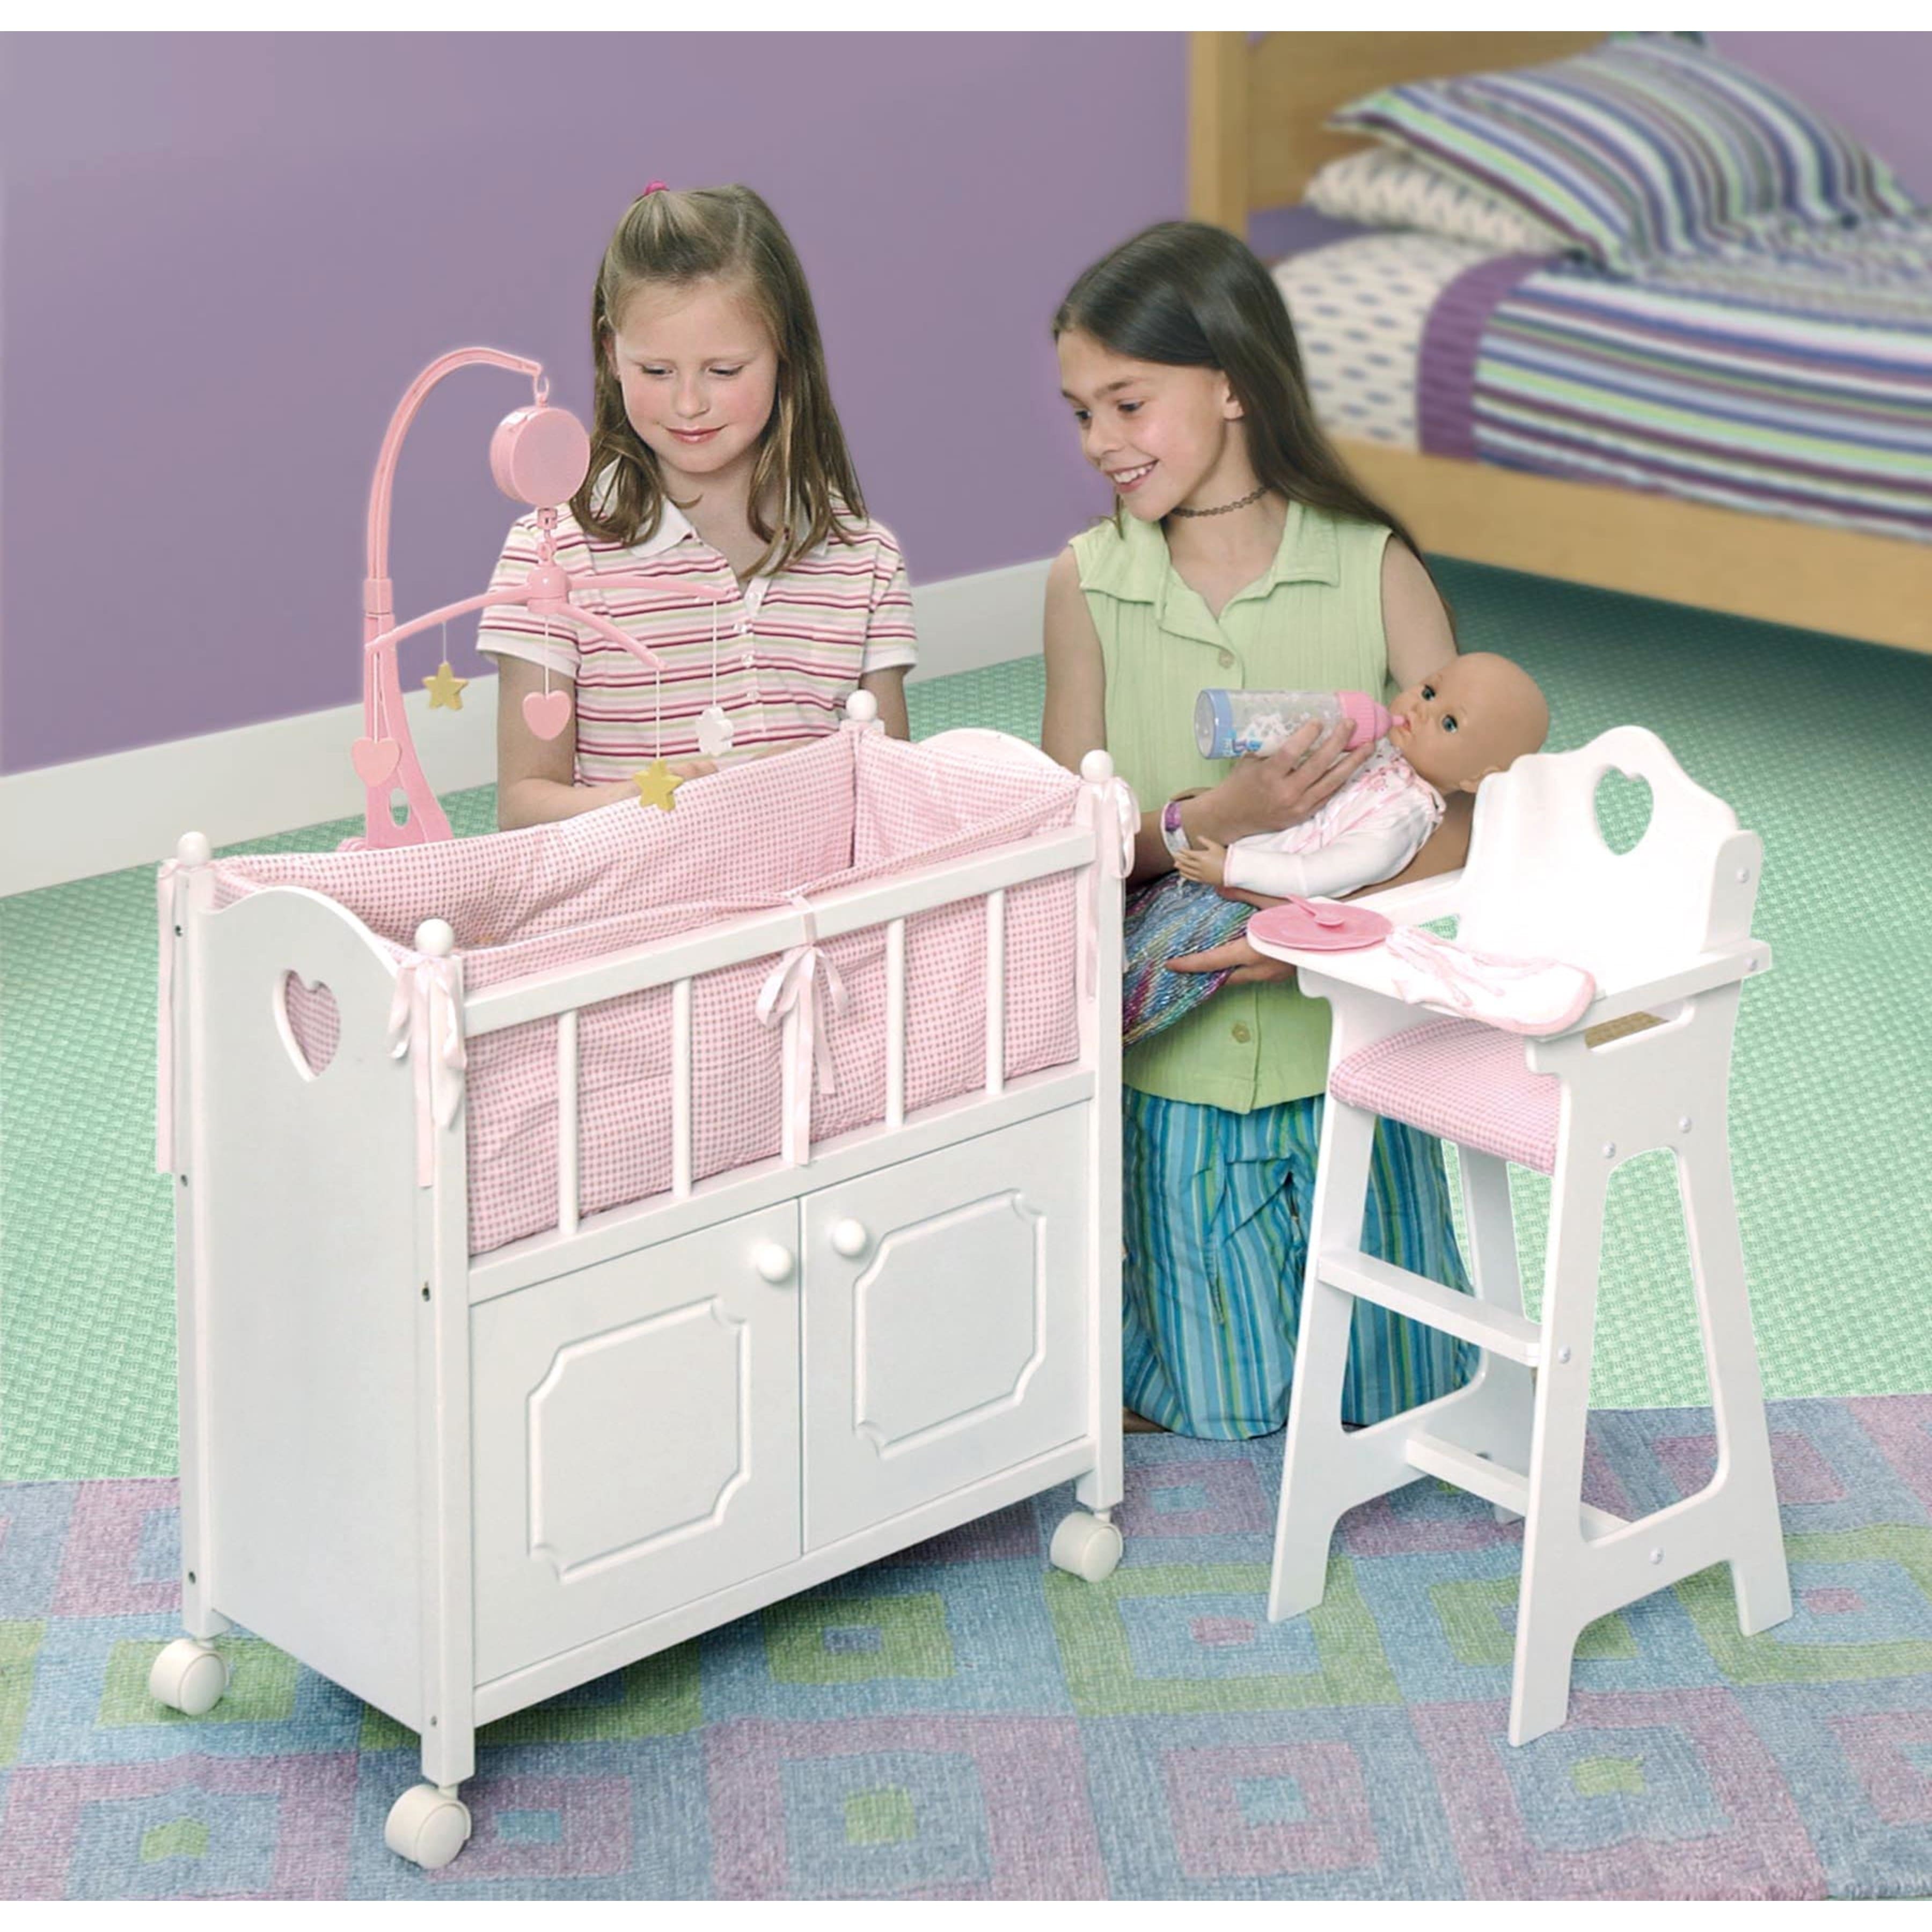 Badger Basket White Doll Crib with Cabinet Bedding and Mobile